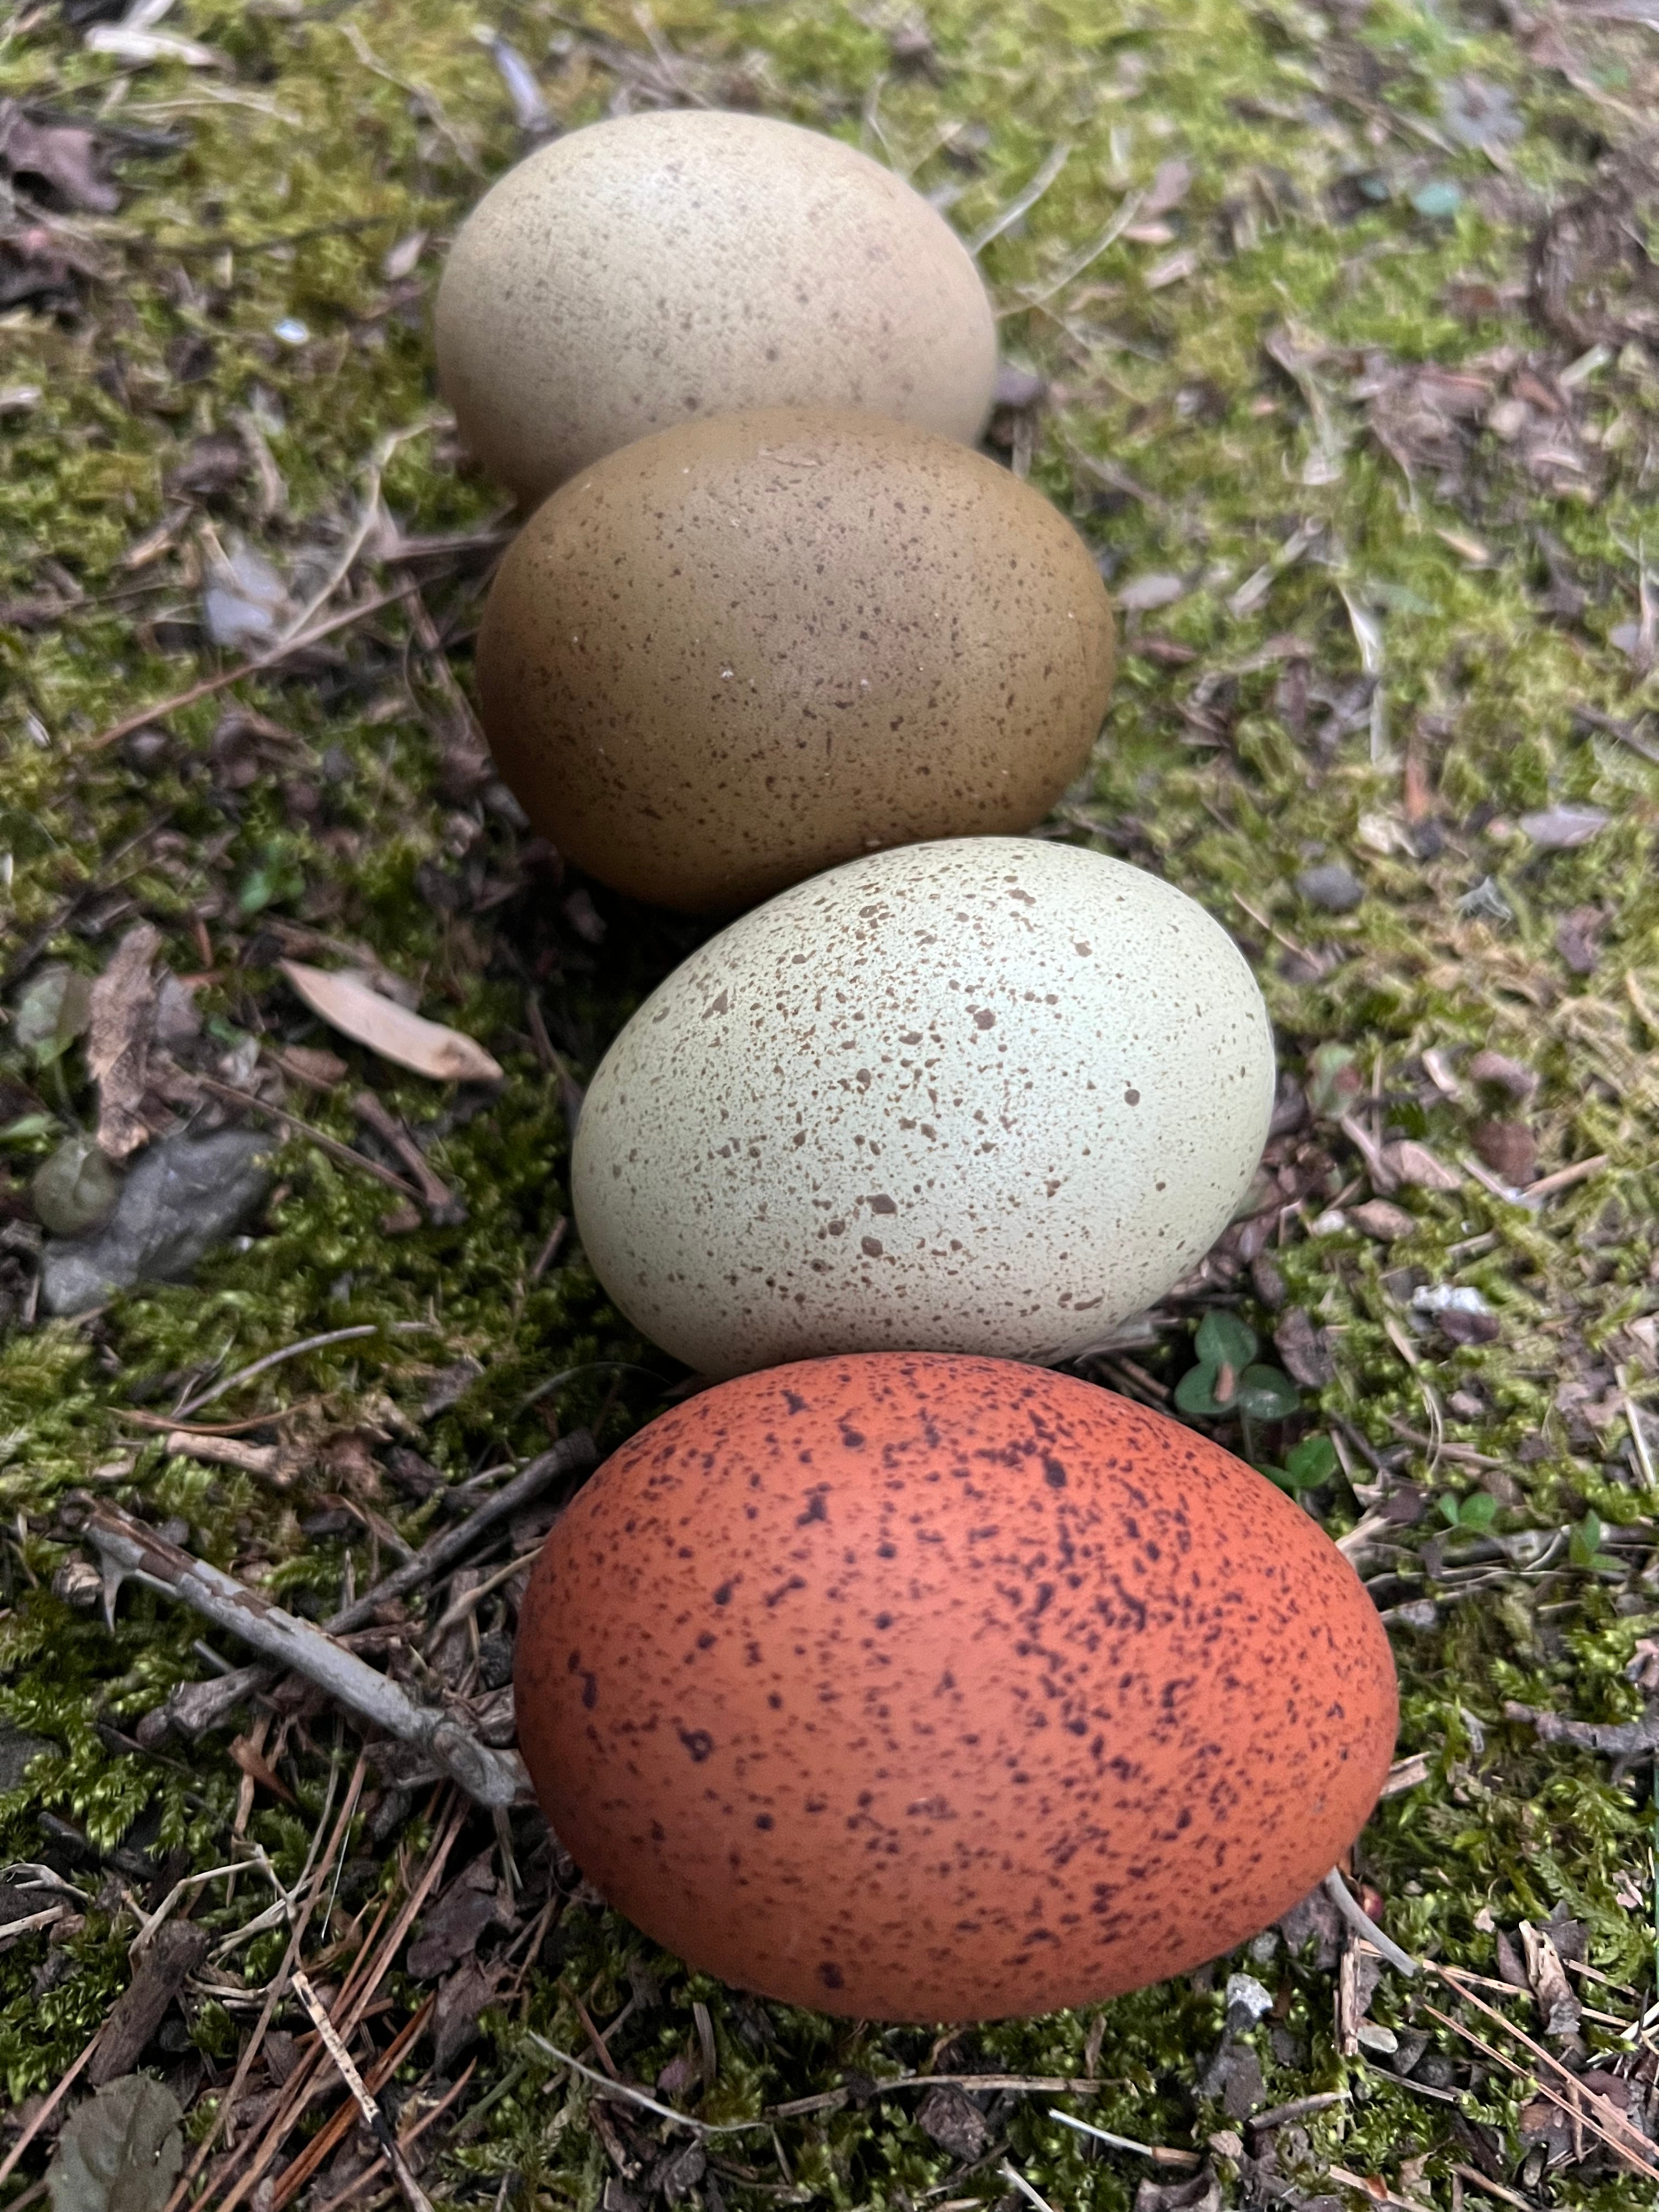 Speckled Hatching Eggs